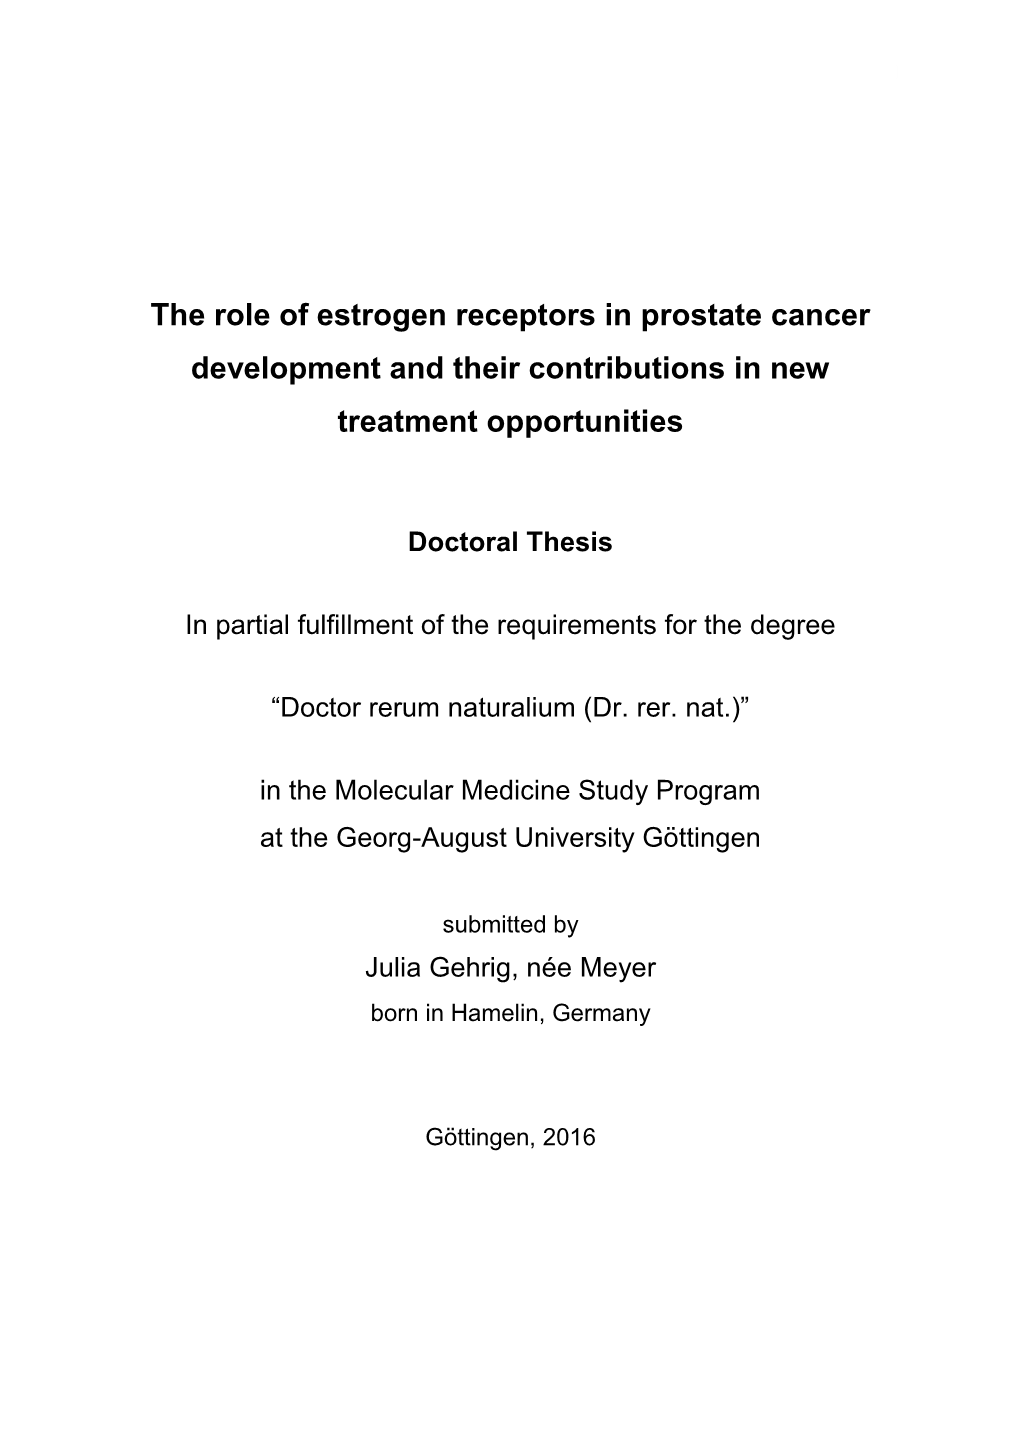 The Role of Estrogen Receptors in Prostate Cancer Development and Their Contributions in New Treatment Opportunities